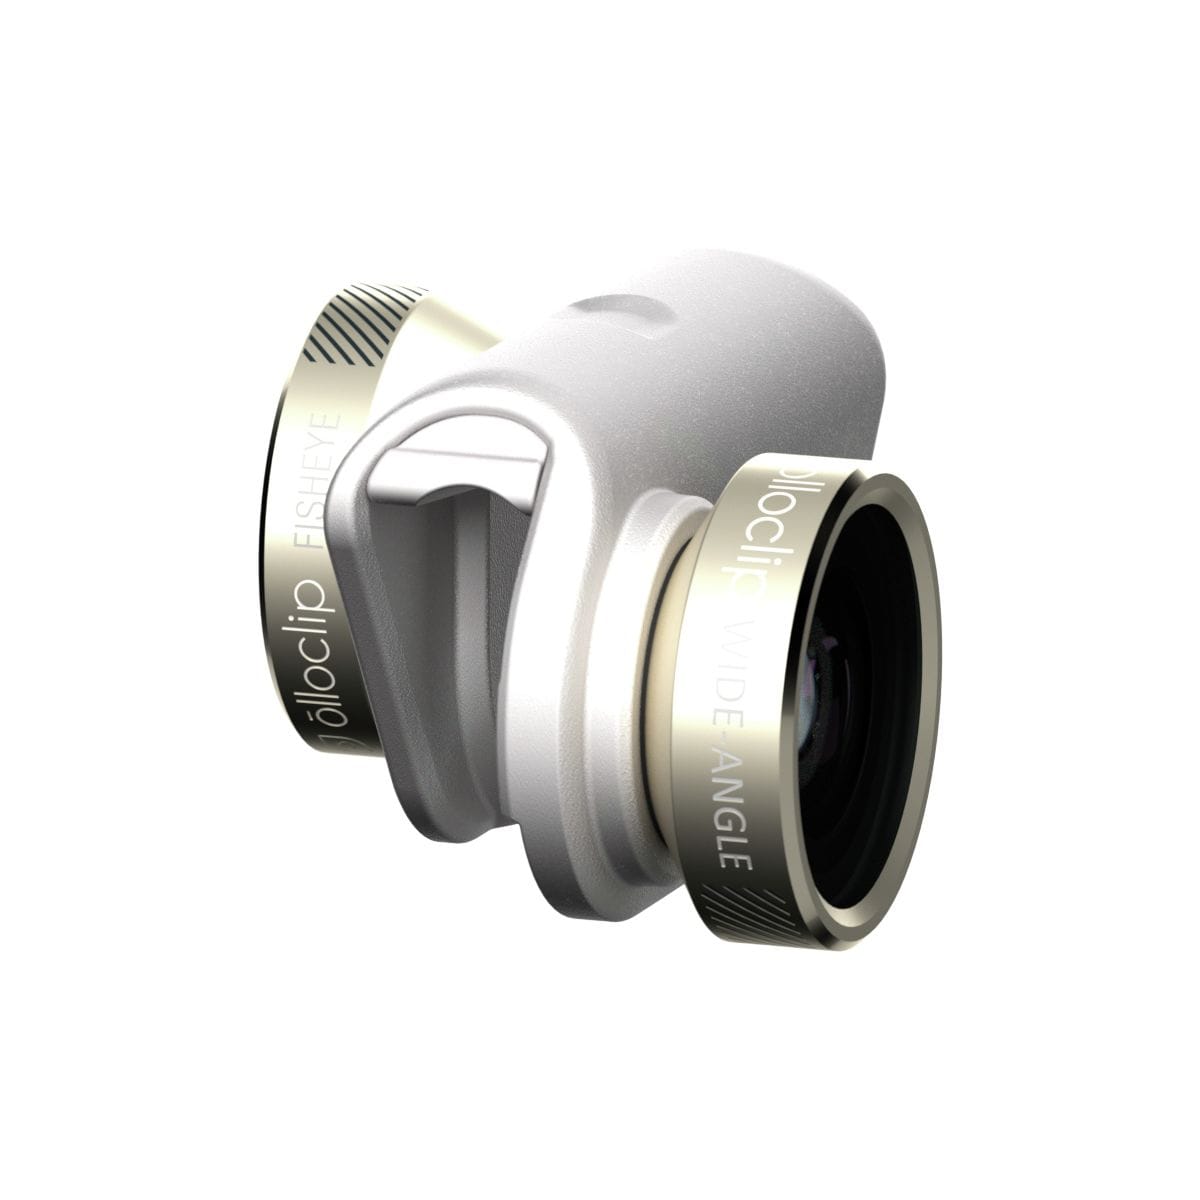 olloclip 4-in-1 Lens System - iPhone 6\/6 Plus Gold Lens, One Size